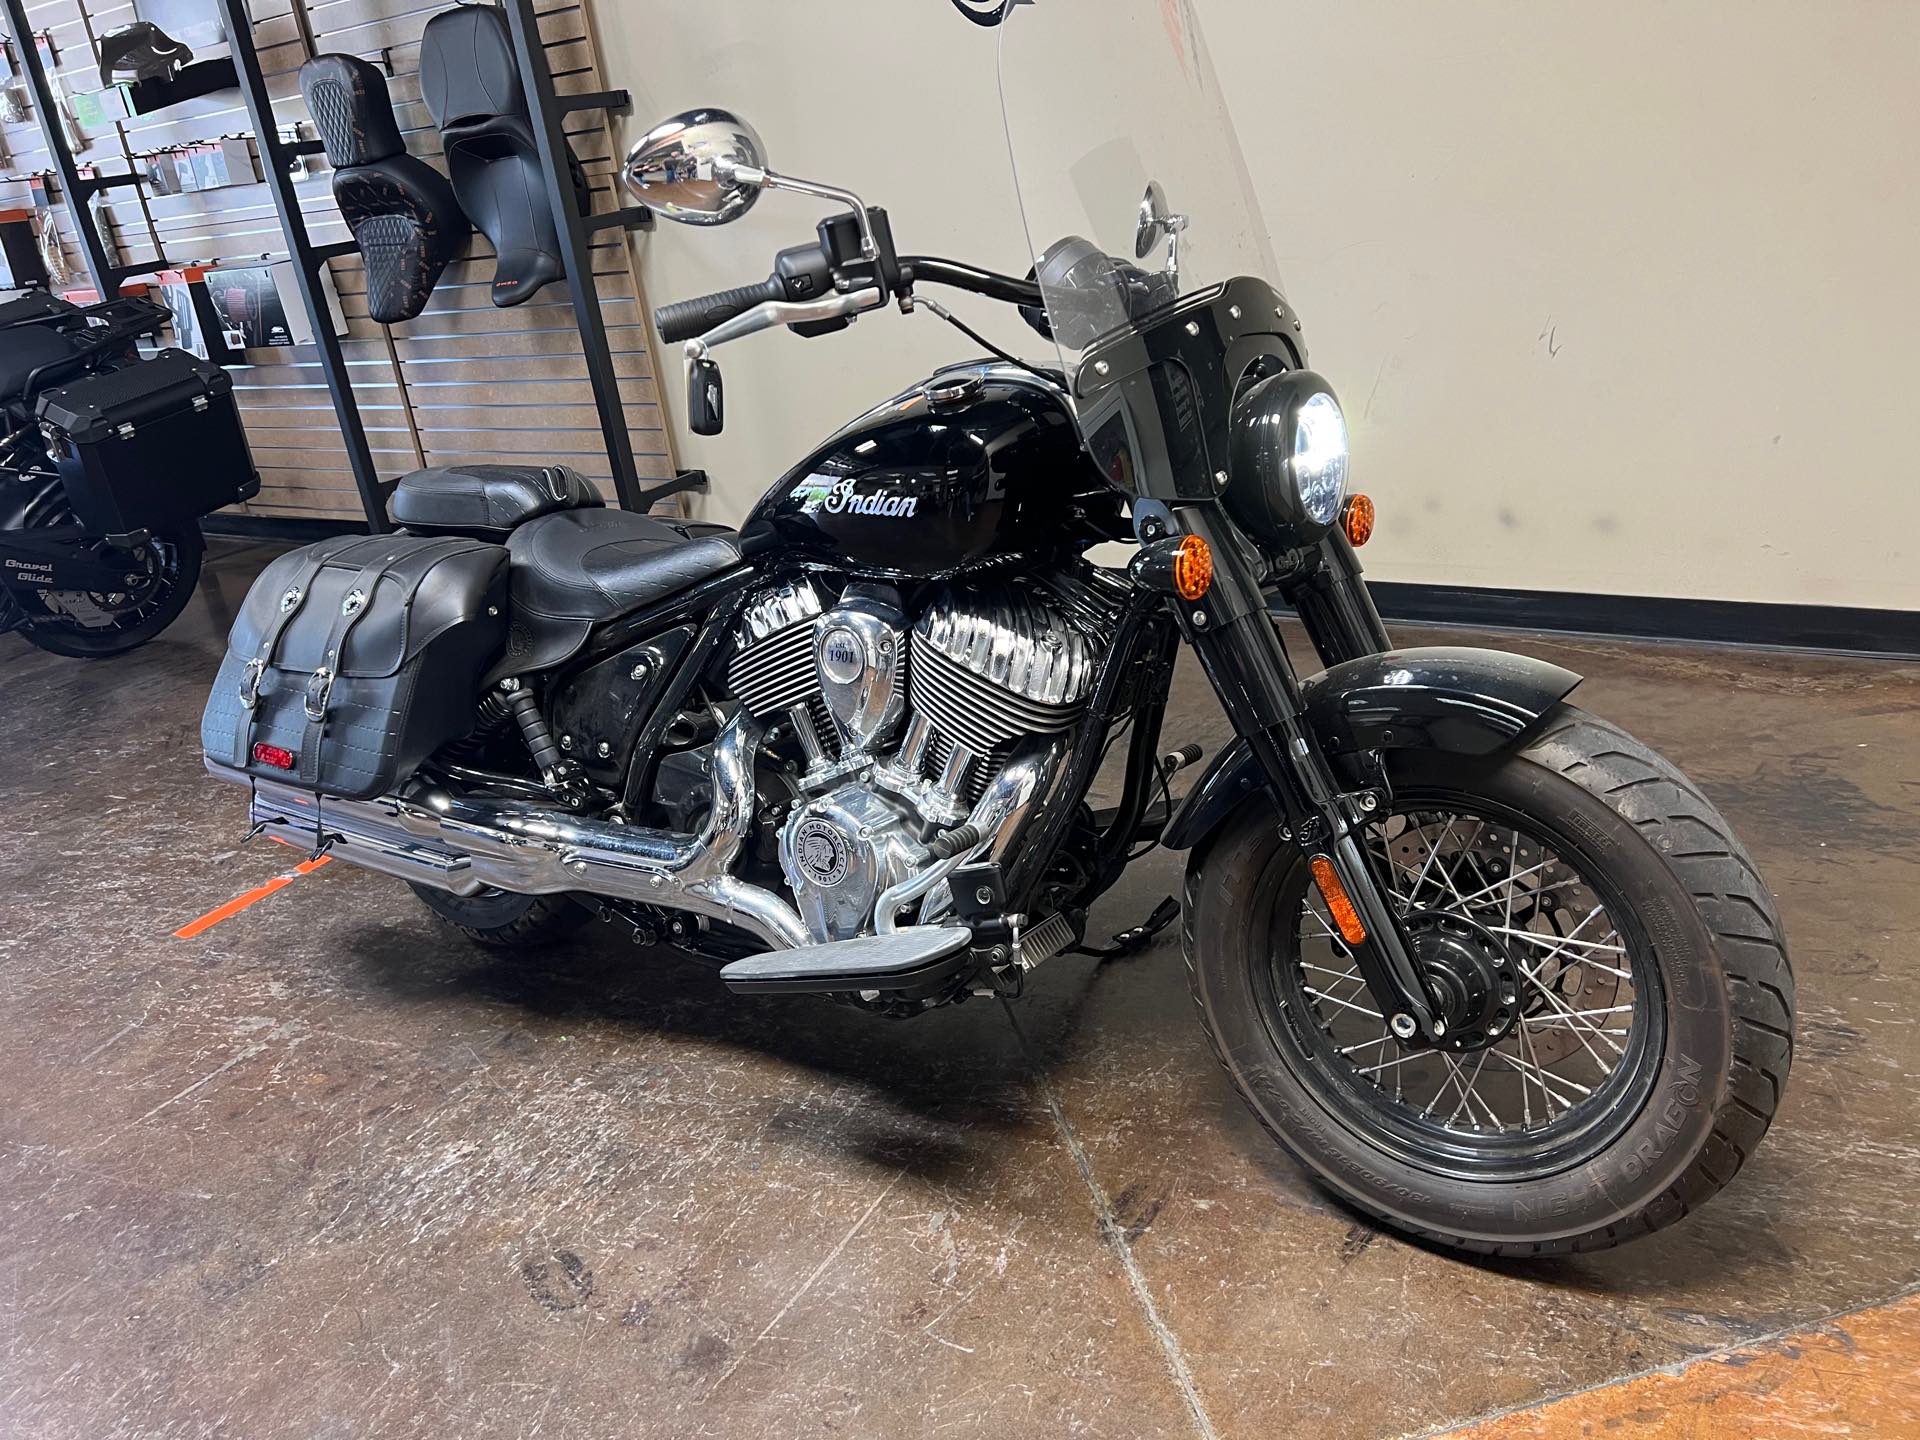 2022 Indian Motorcycle Super Chief Limited at Southern Devil Harley-Davidson